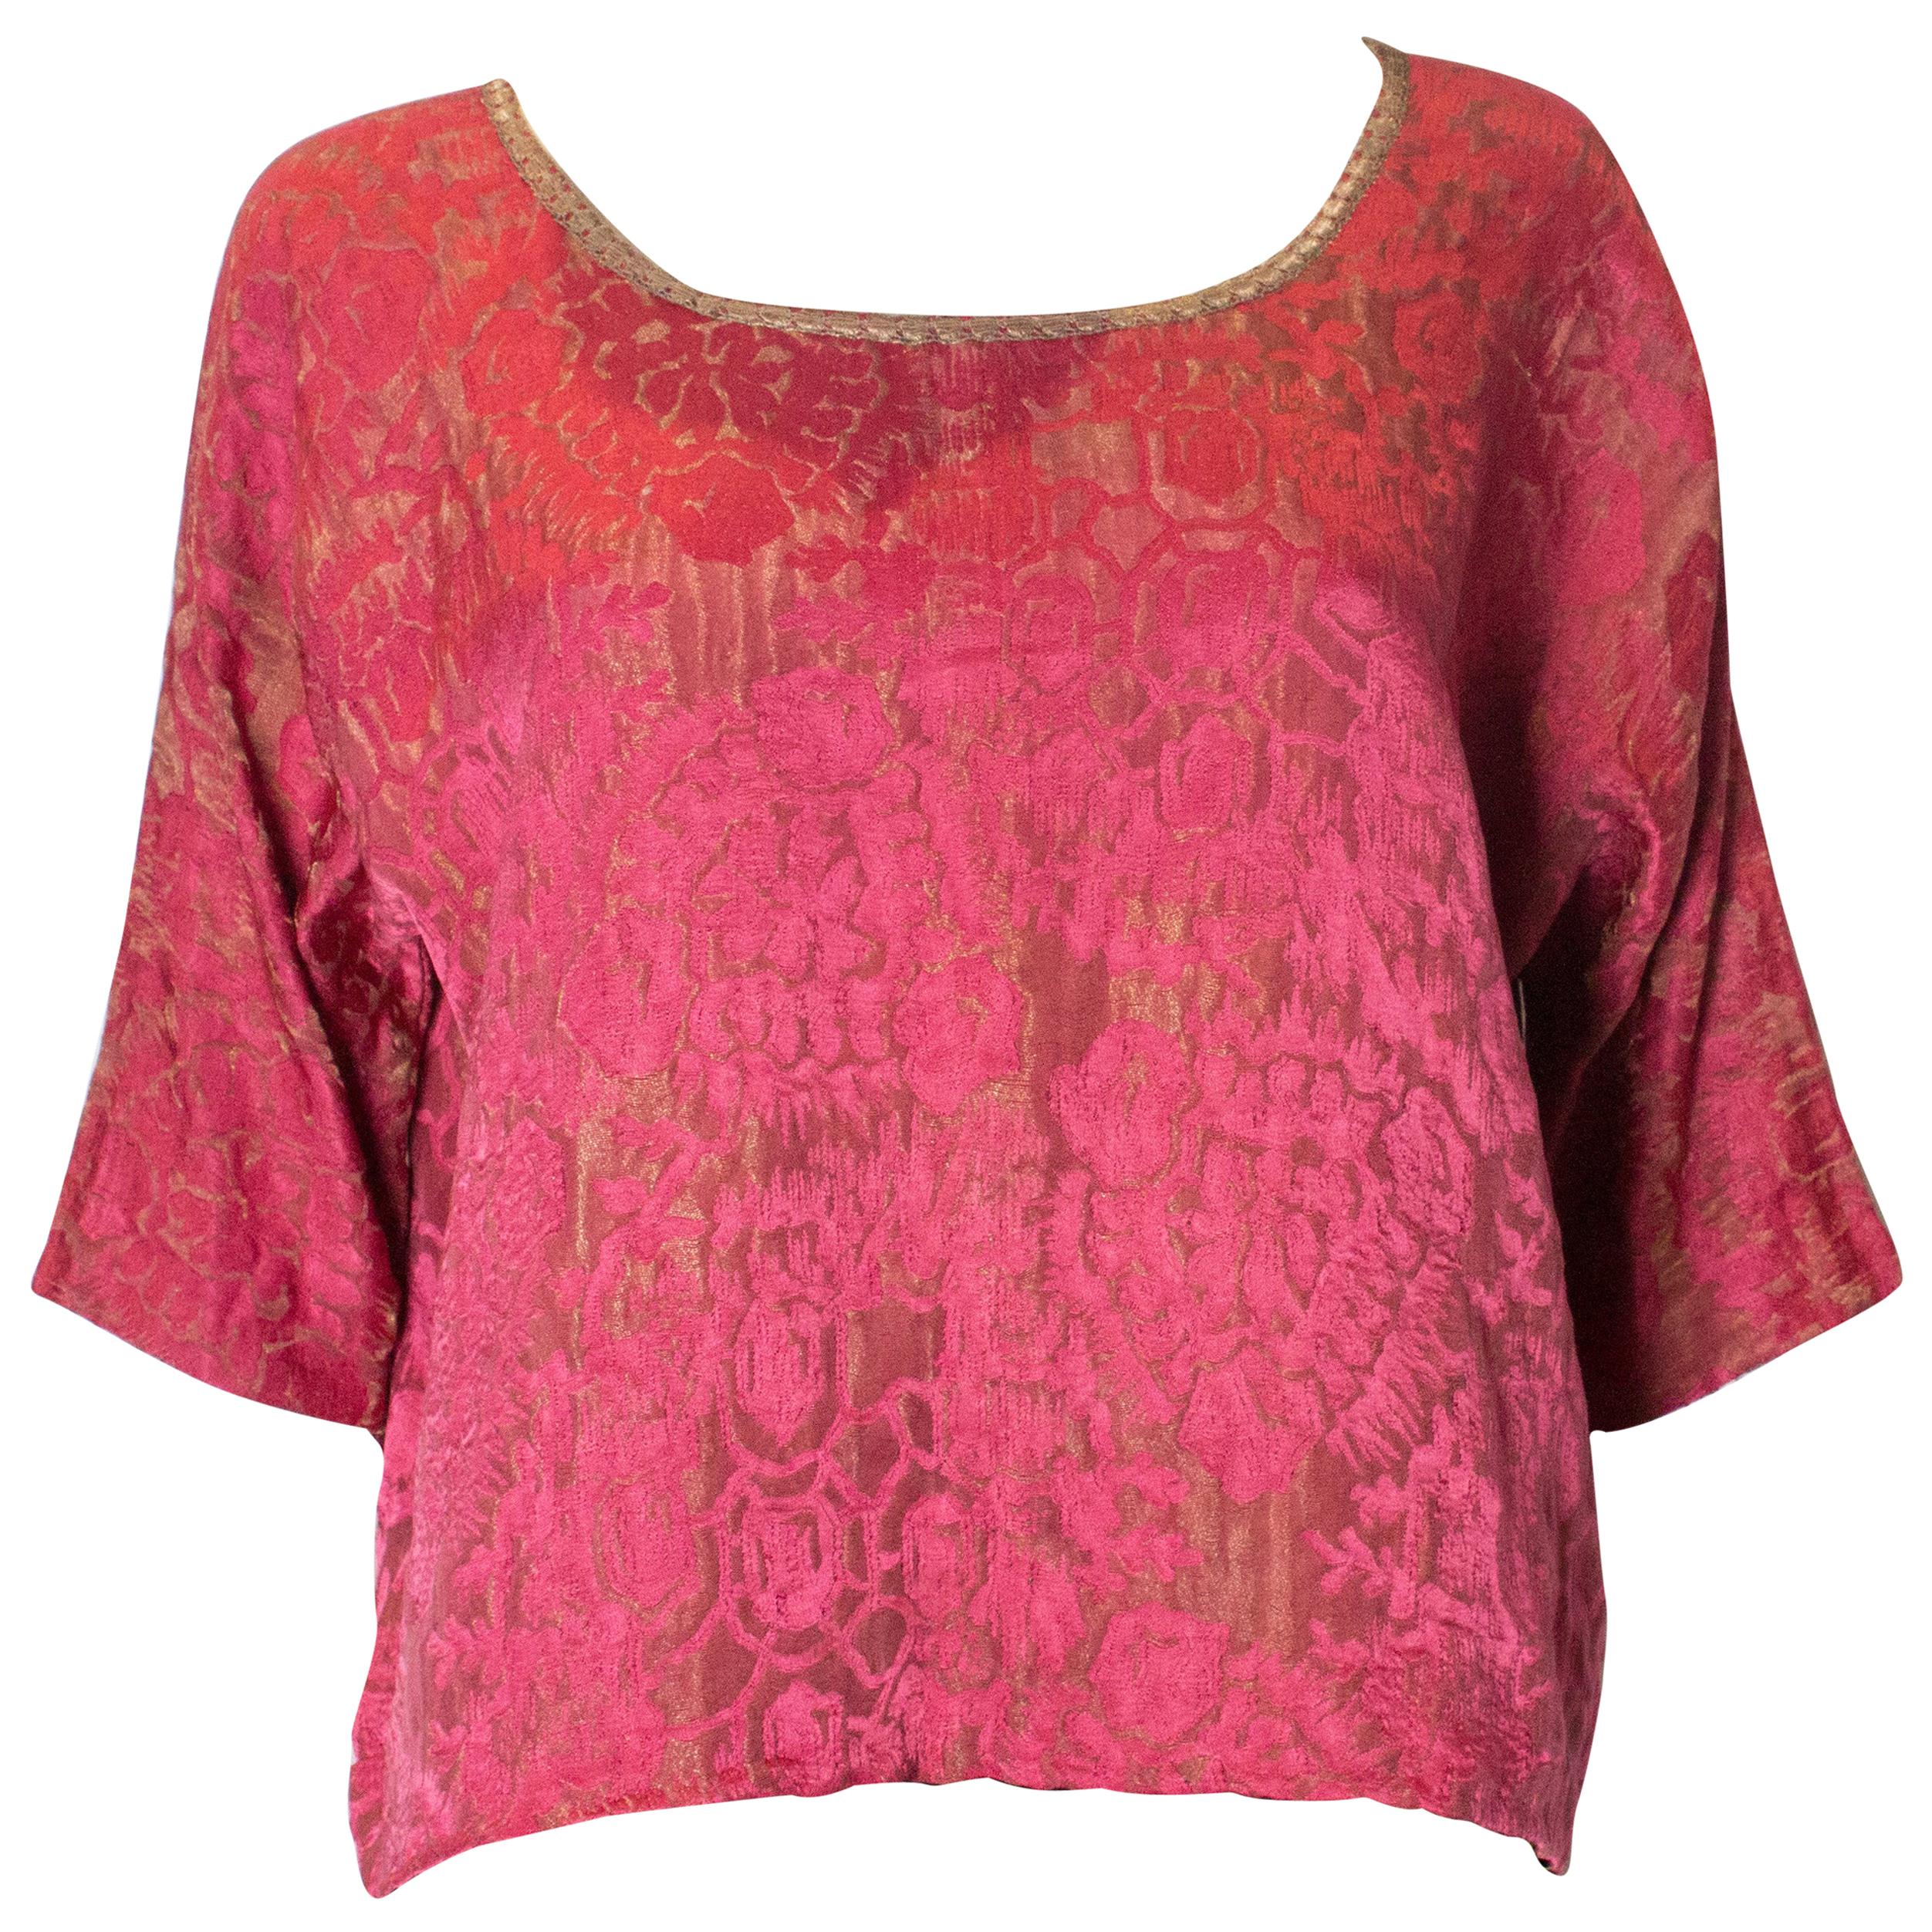 Vintage Raspberry and Gold Top